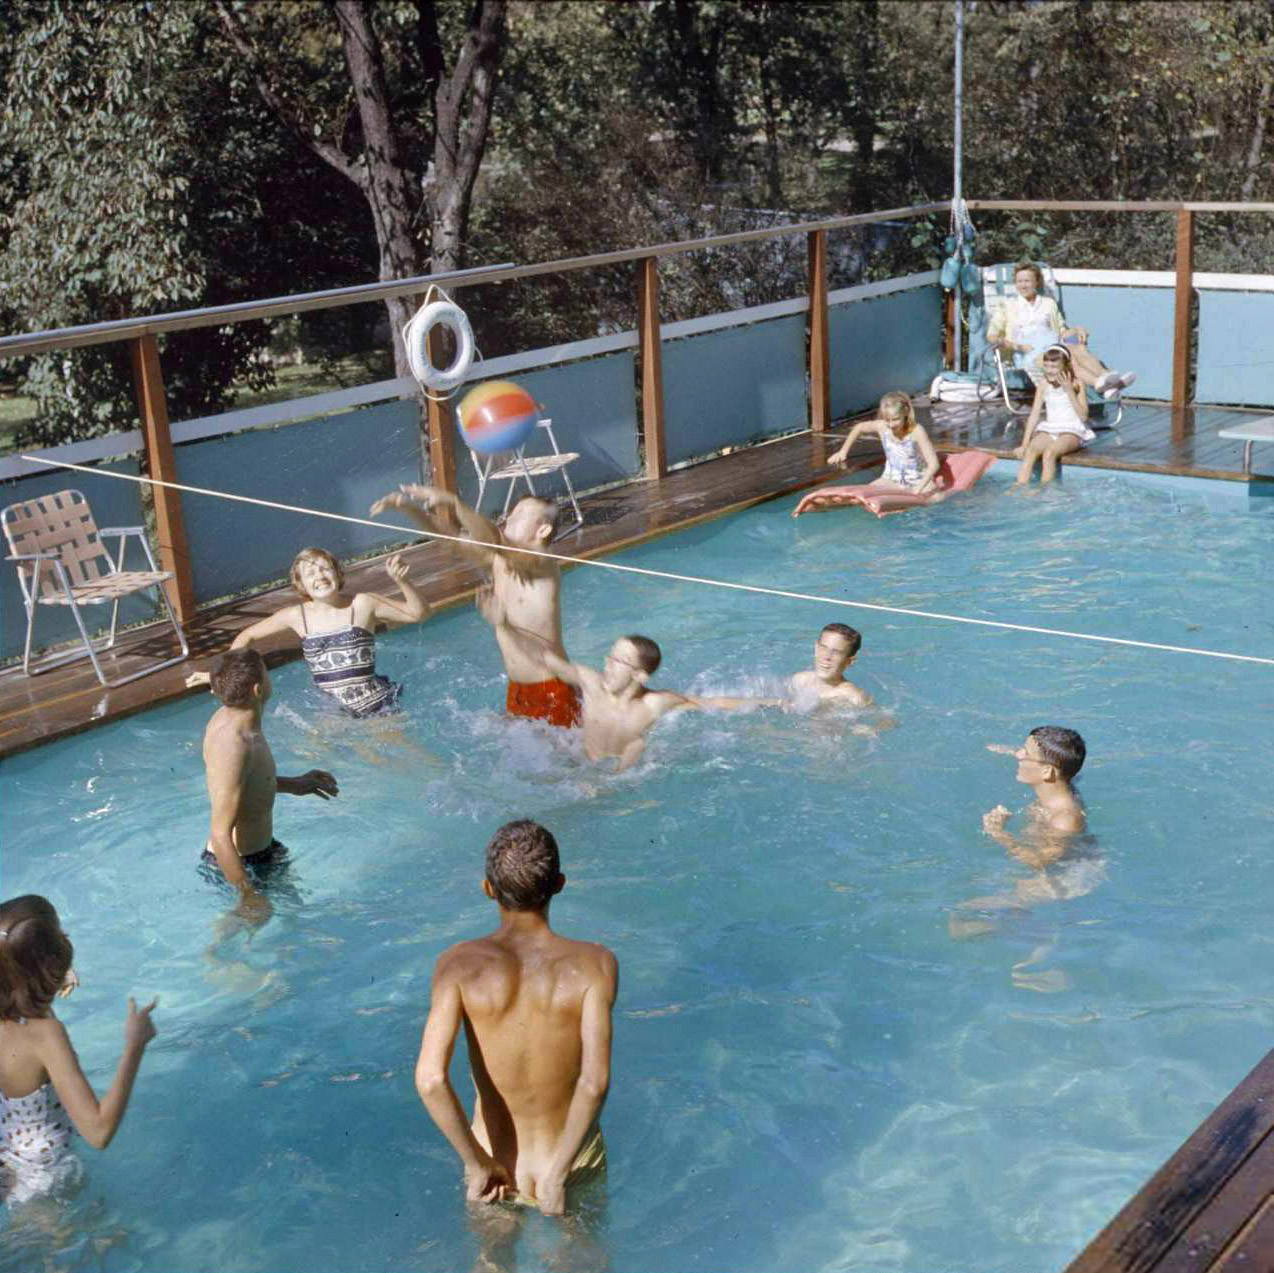 Circa 1959. "Swimming pool." Not just any swimming pool, but an Esther Williams prefab above-ground swimming pool. I wonder if any of these survive. Color transparency by Frank Scherschel, Life magazine photo archive. View full size.